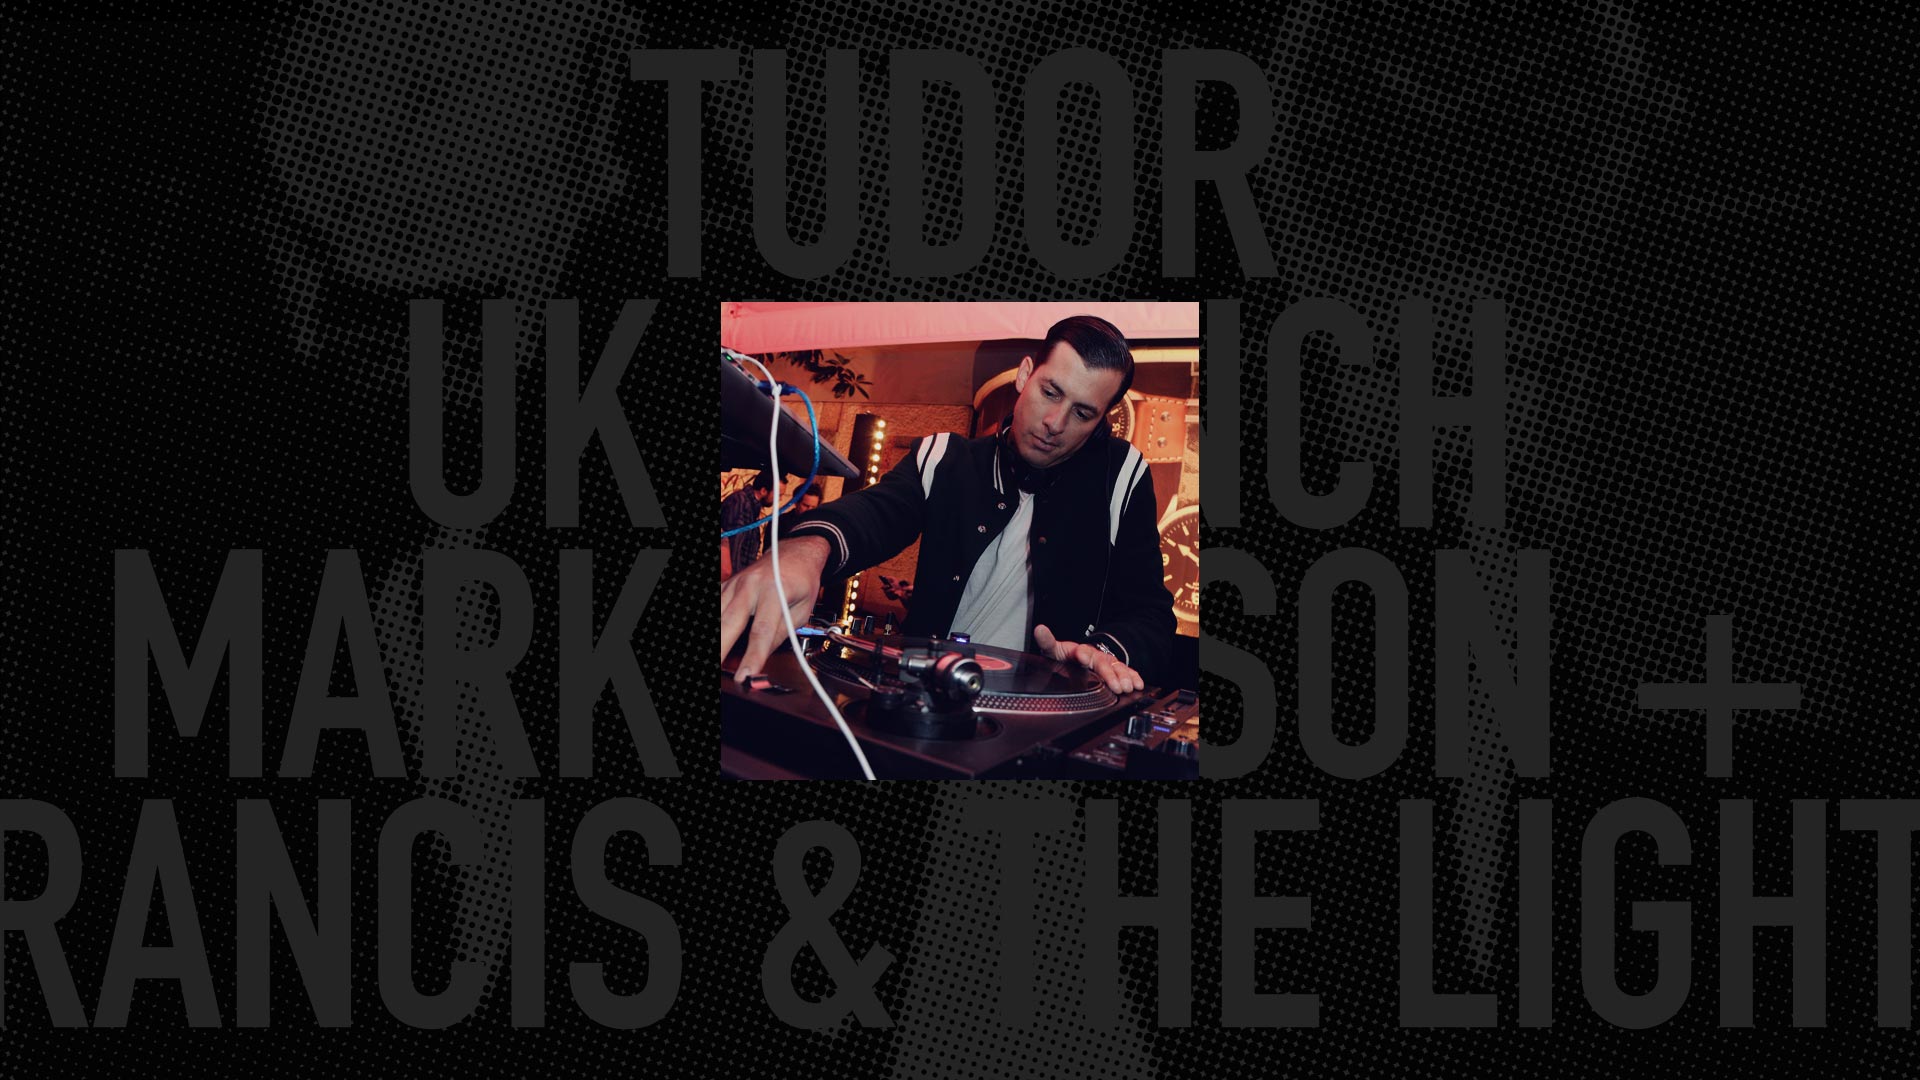 TUDOR<br/> UK LAUNCH<br/> MARK RONSON + FRANCIS AND THE LIGHTS